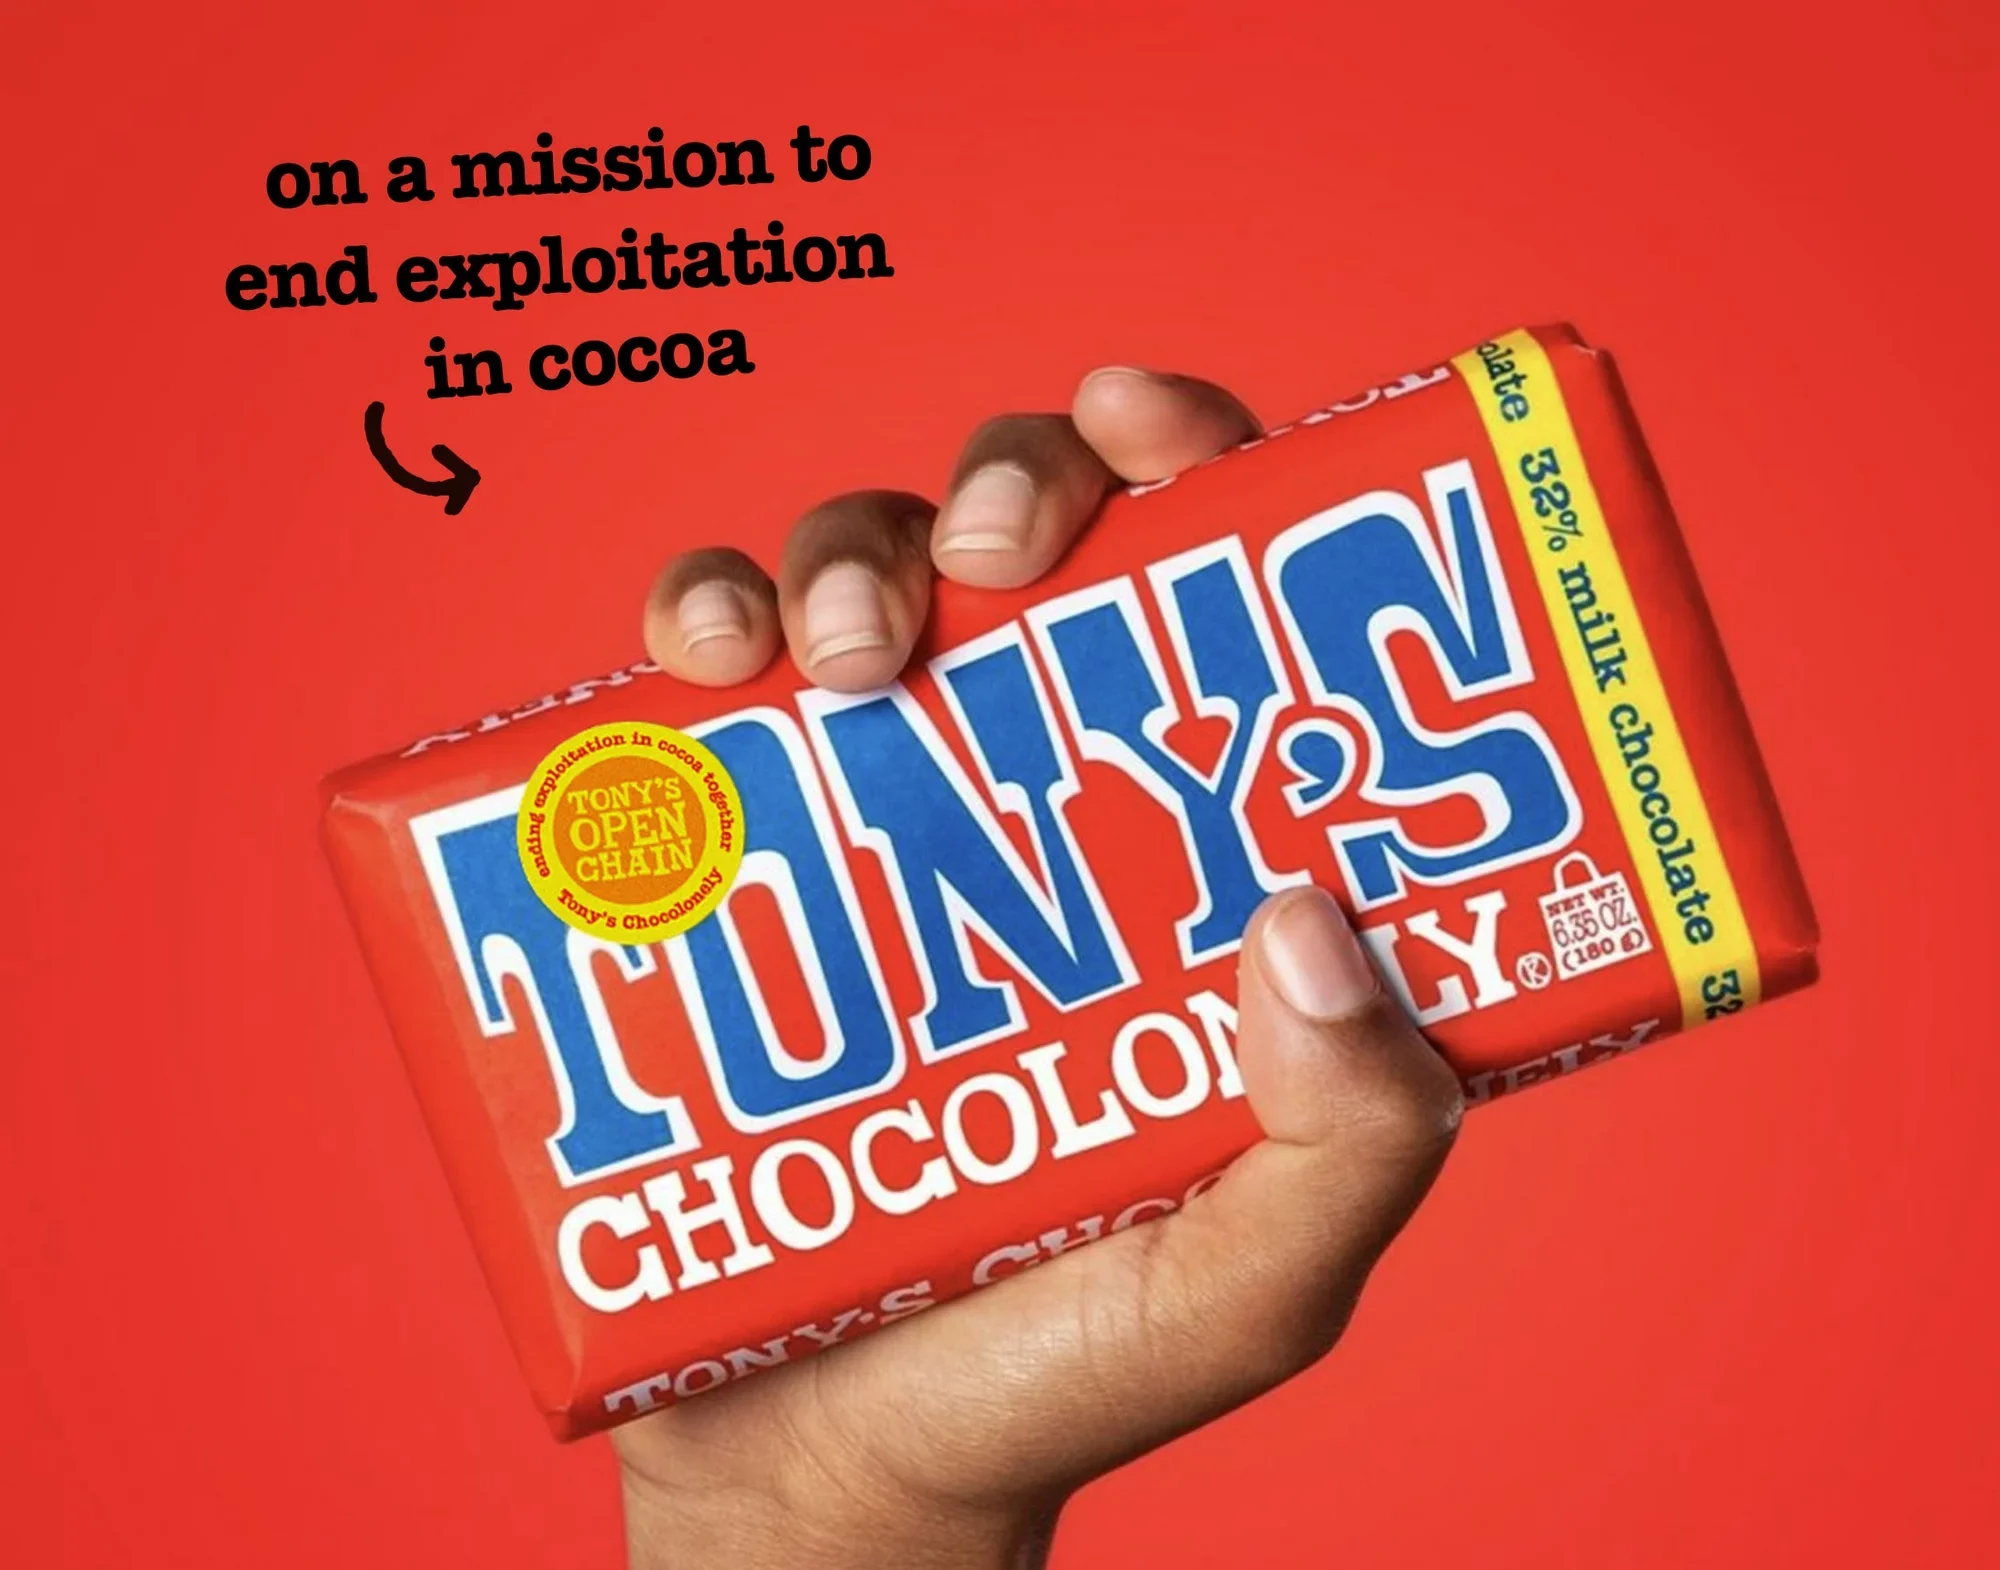 Hand holding a bar of Tony's Chocolonely chocolate with text, "on a mission to end exploitation in cocoa" and an arrow pointing to the chocolate bar, on a red background.